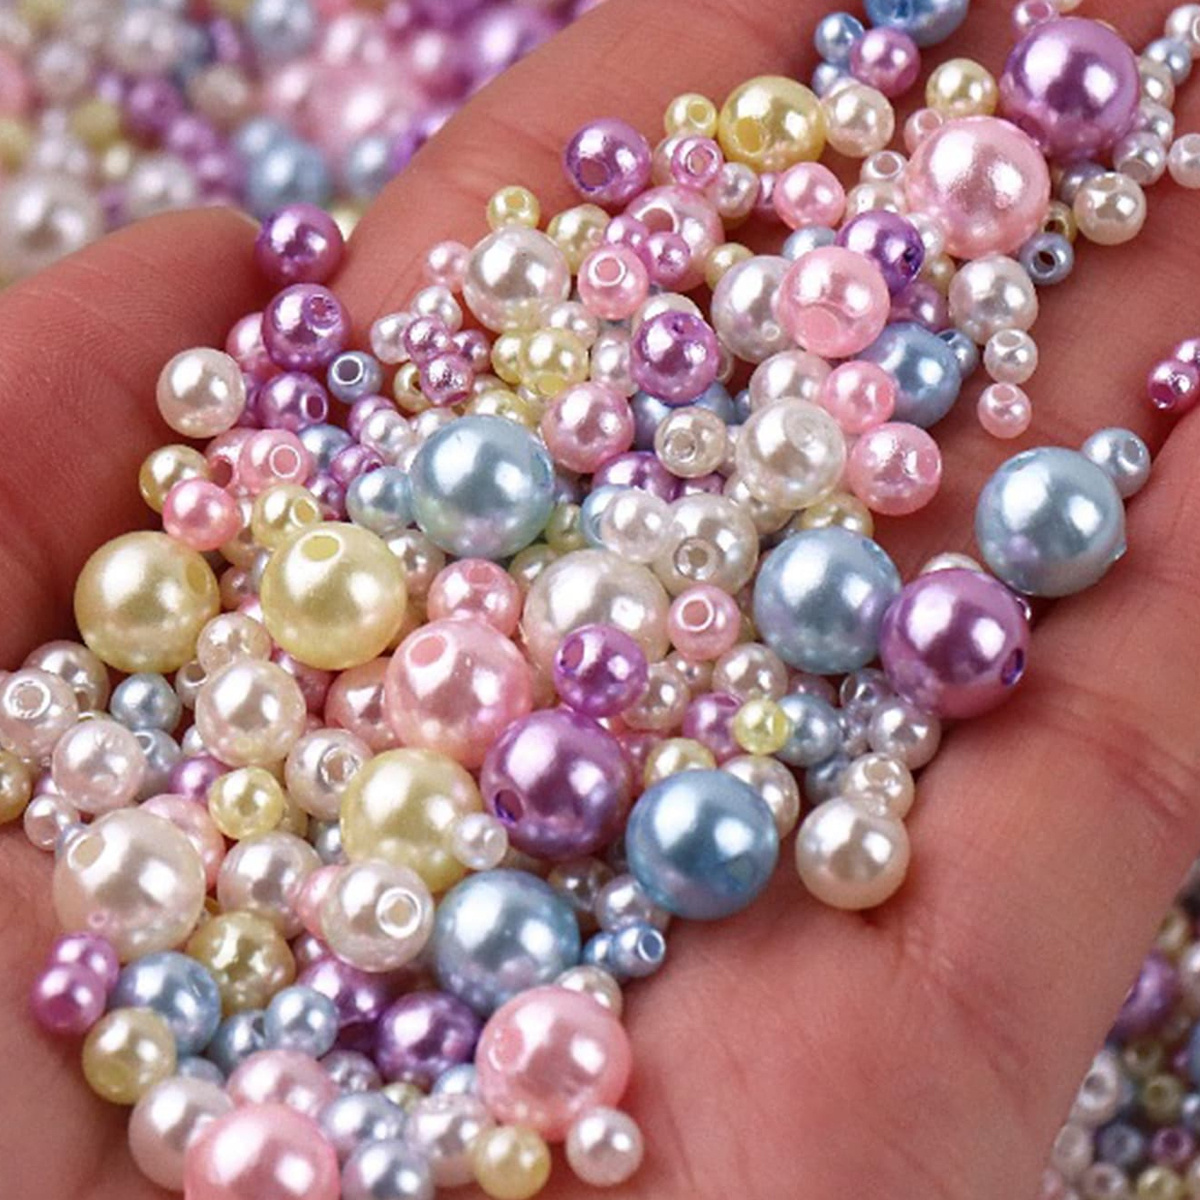 150pcs Faux Pearls Decorative Beads for Sewing Crafts Clothes